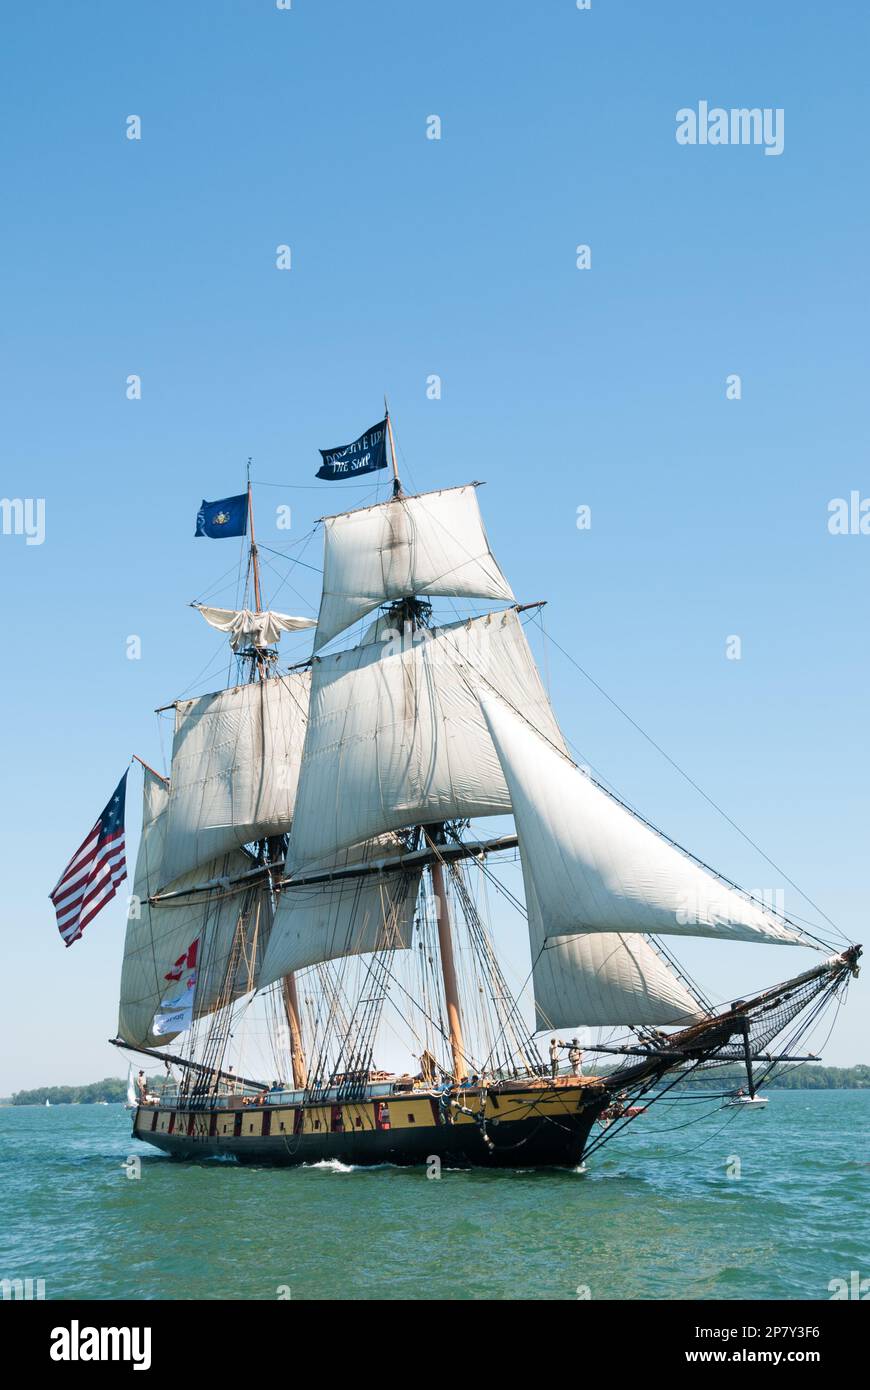 The Brig Niagara under full sail at a tall ship festival in Toronto Harbour Canada Stock Photo